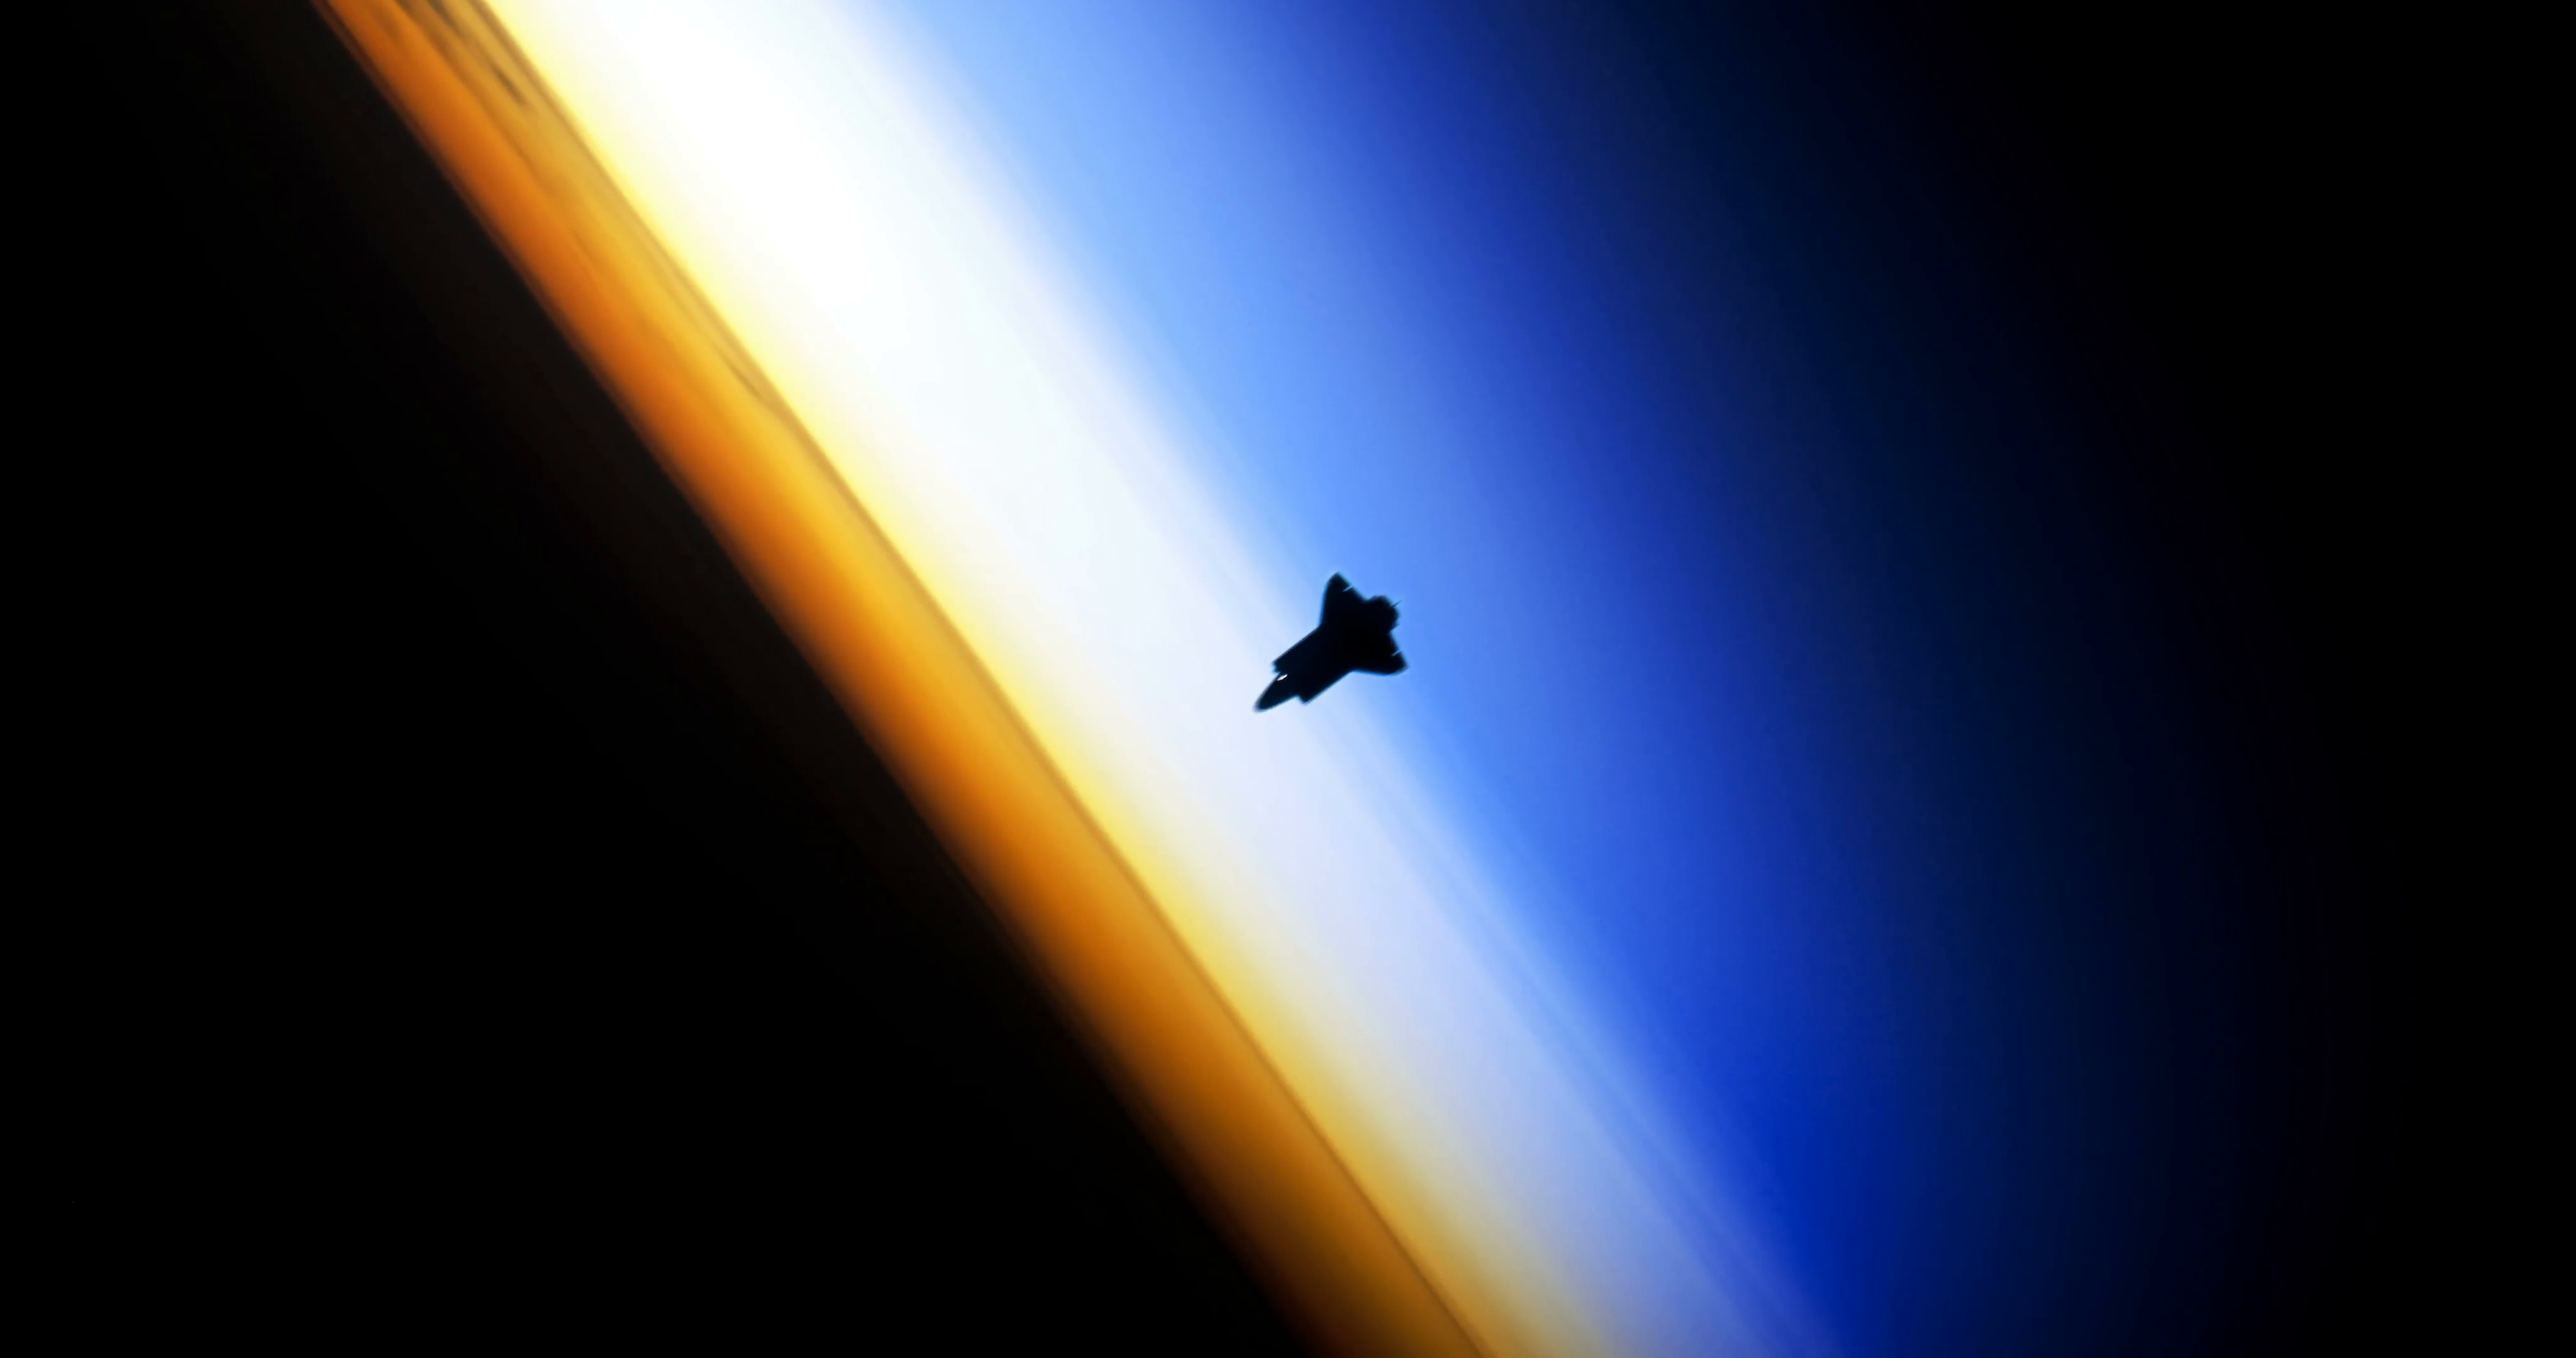 Space Shuttle Silhouette with Sun in Background 4K Motion